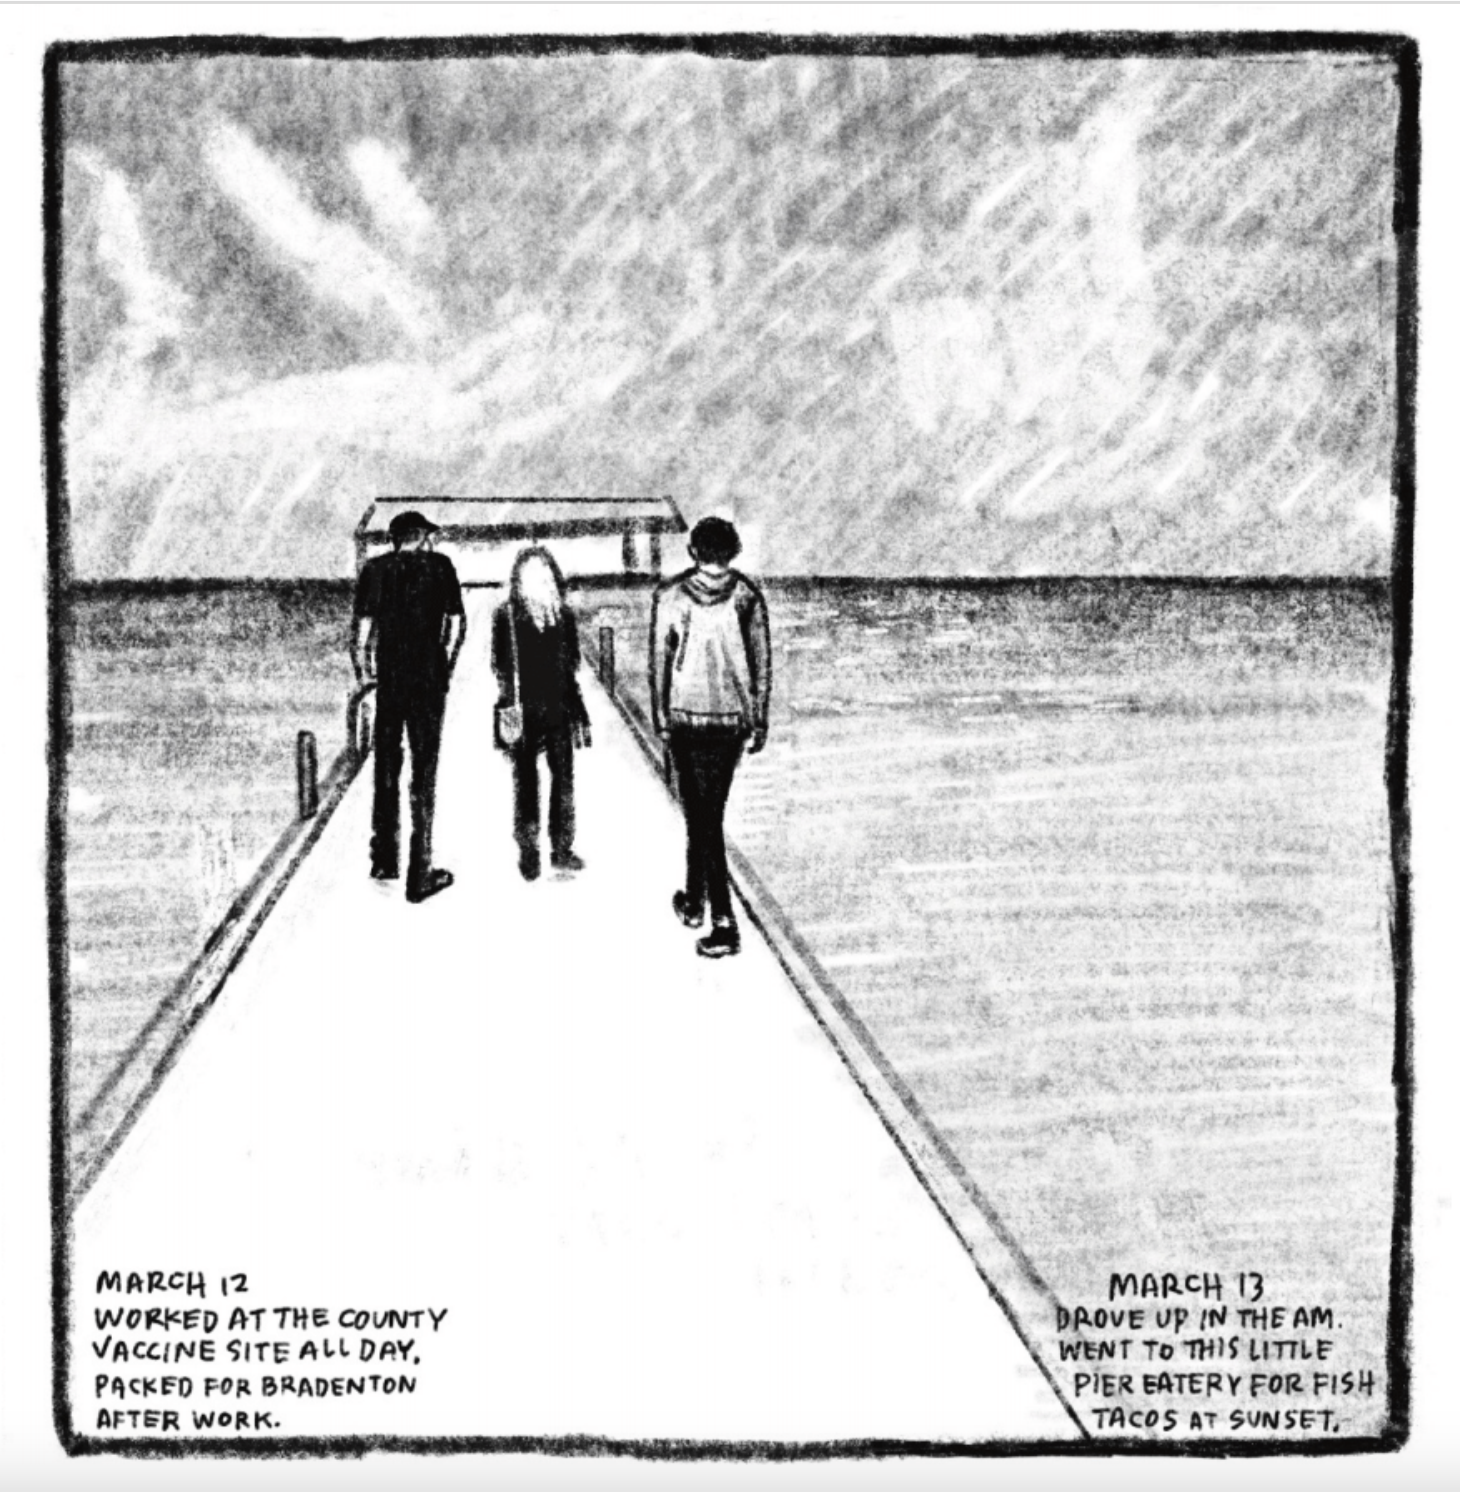 Three figures - Kim, Tony, and Enzo - walk on a pier toward a building on the horizon. 
Lower left corner reads: "MARCH 12
WORKED AT THE COUNTY VACCINE SITE ALL DAY. PACKED FOR BRADENTON AFTER WORK."
Lower right corner reads: "MARCH 13
DROVE UP IN THE AM. WENT TO THIS LITTLE PIER EATERY FOR FISH TACOS AT SUNSET."